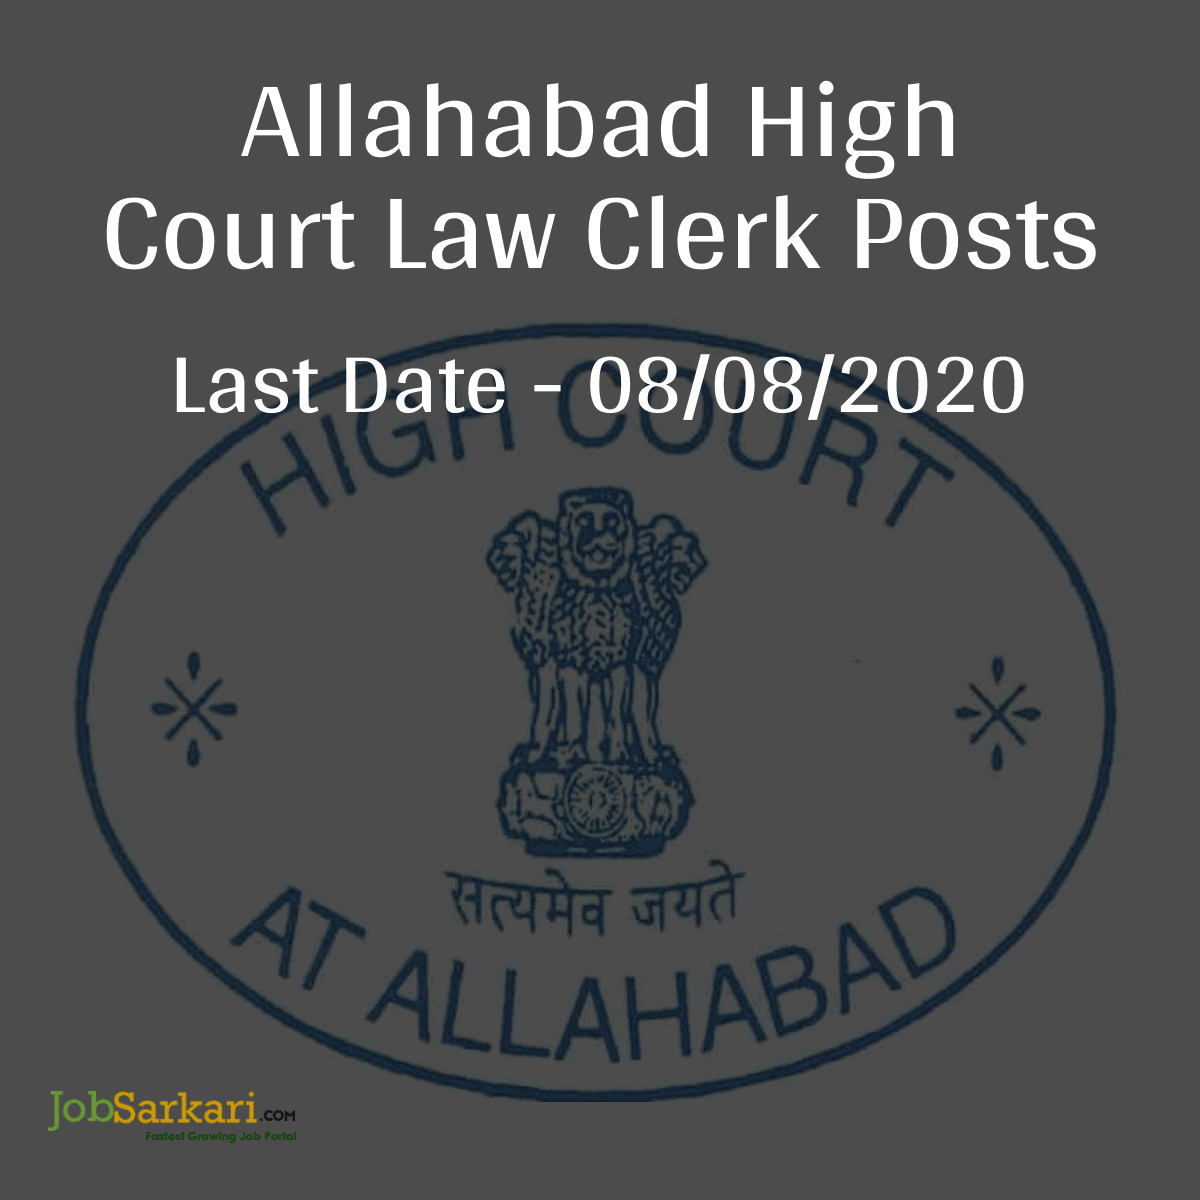 Allahabad High Court Law Clerk Posts 1